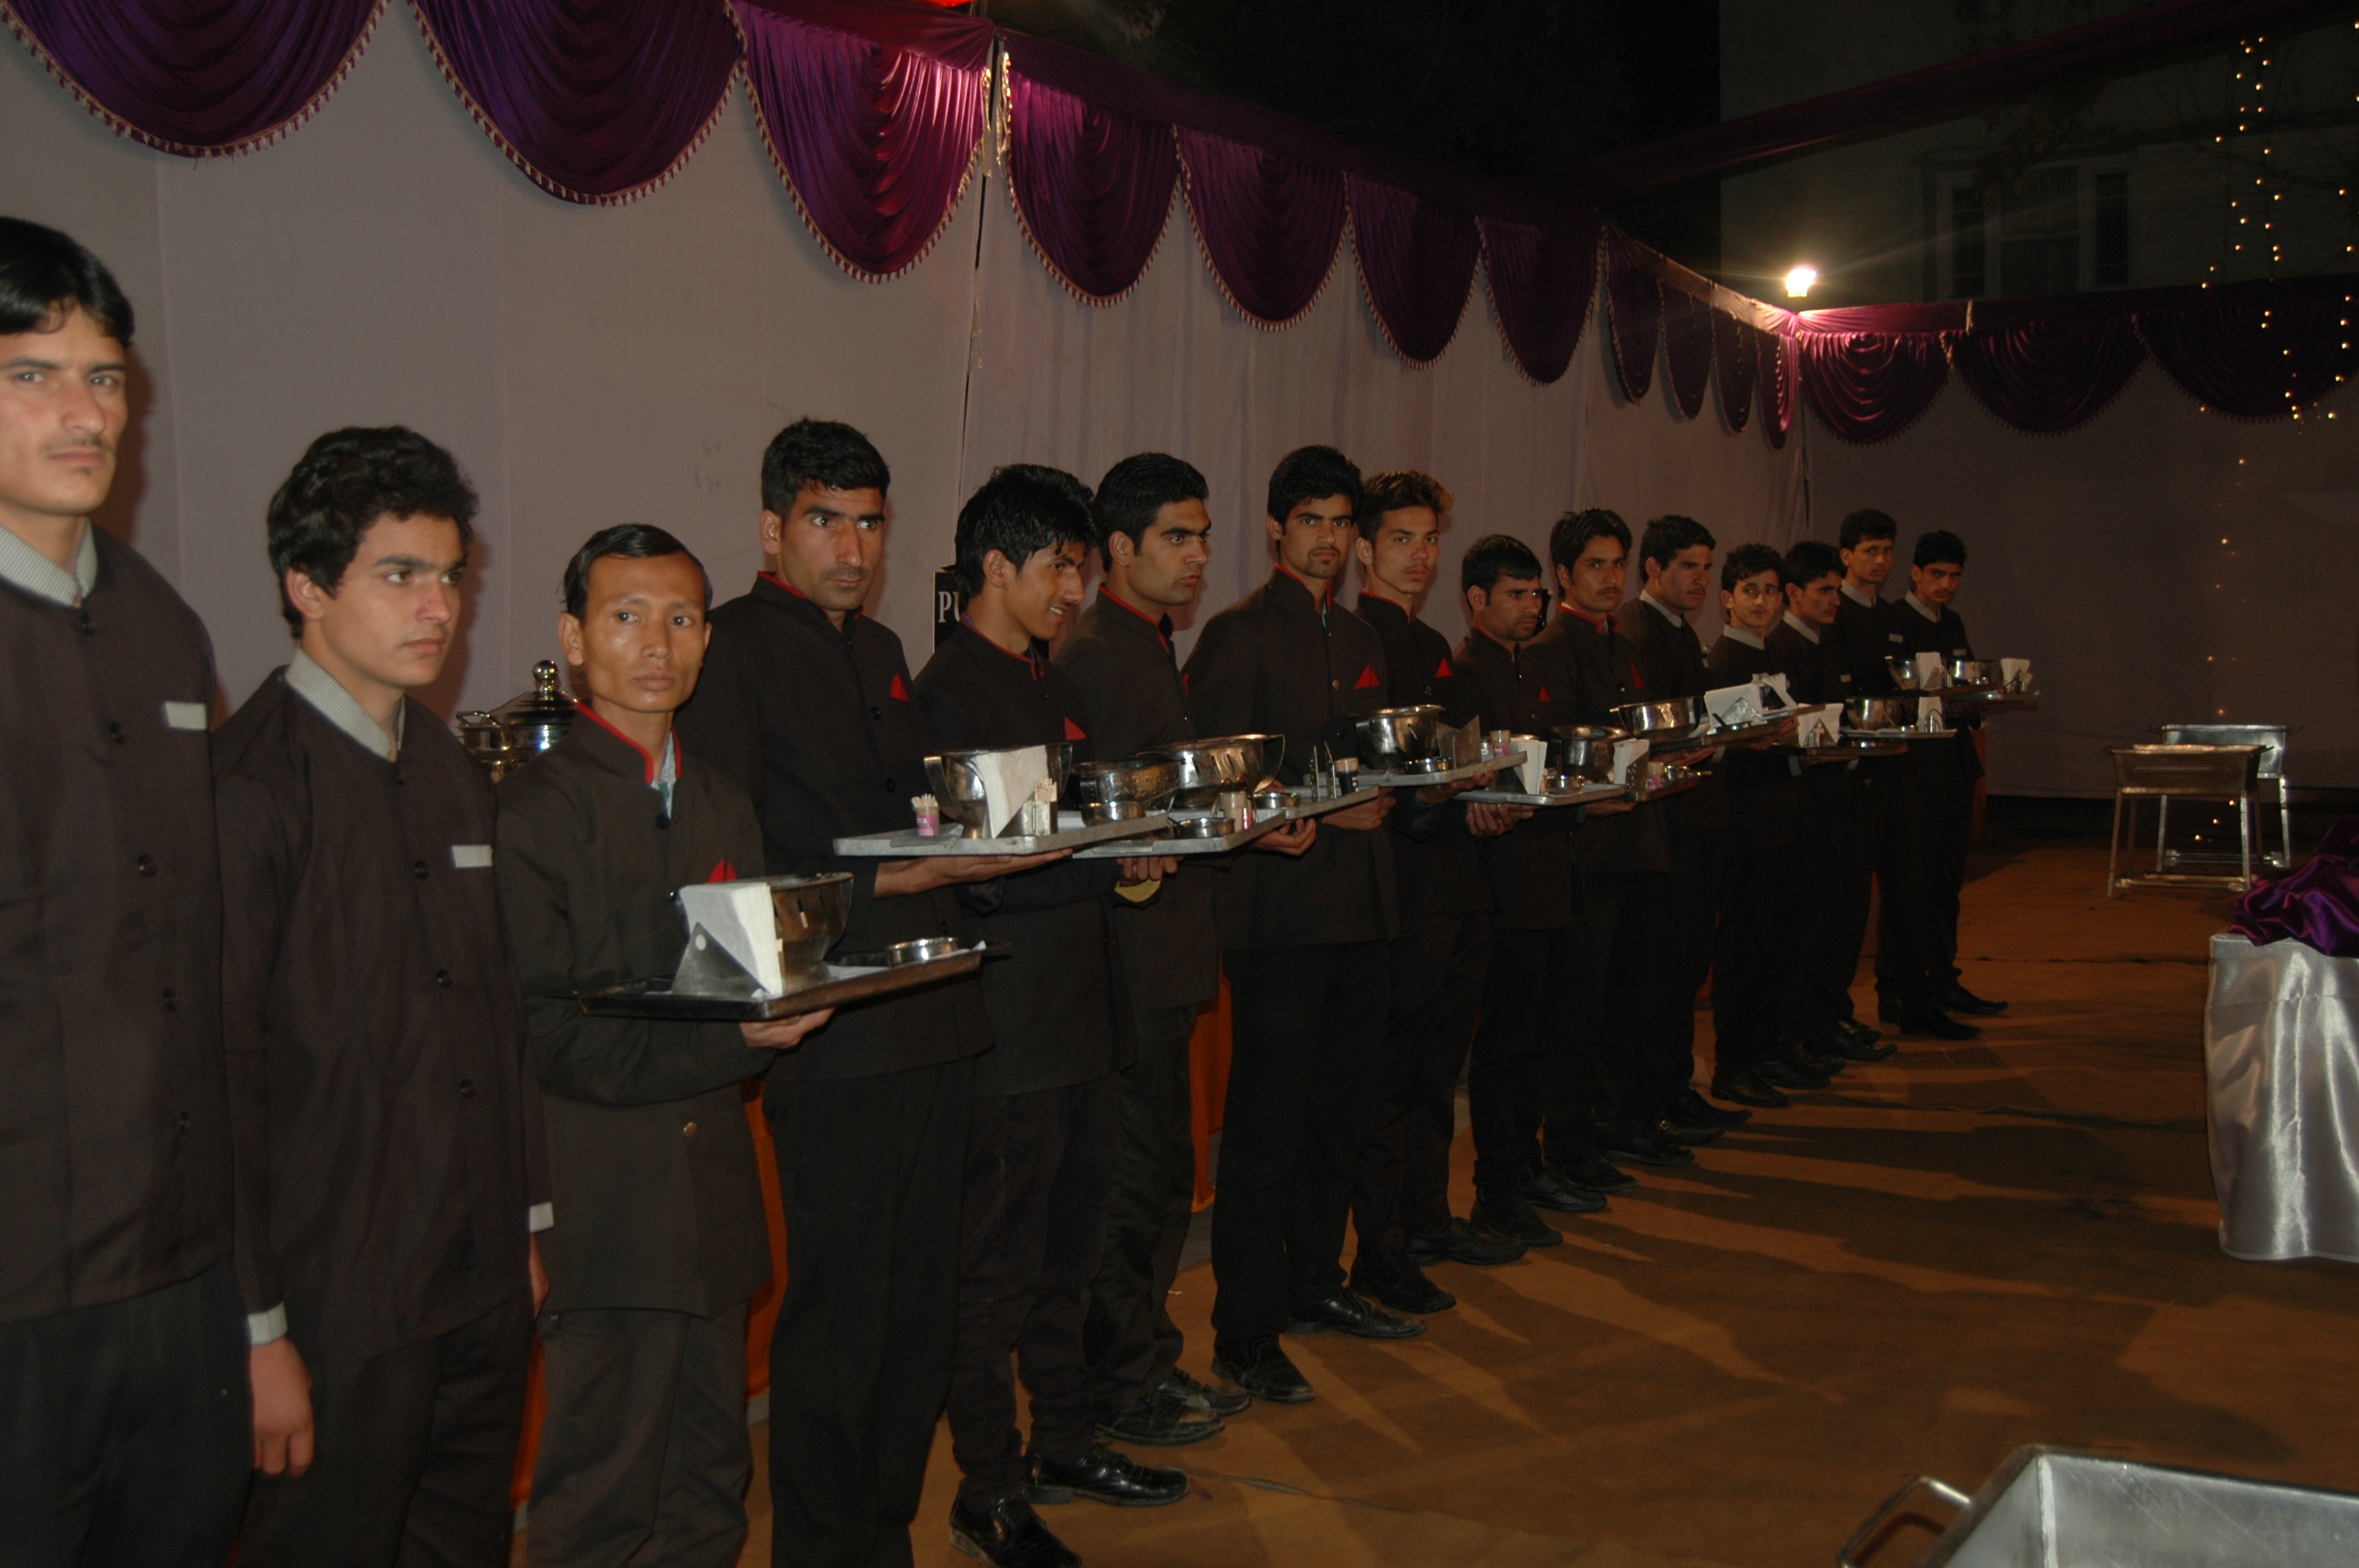 corporate catering service in chandigarh | Red Tag Caterers | Best  catering service in chandigarh, leading catering service in chandigarh, best wedding service in chandigarh, best wedding catering in chandigarh, best caterers in chandigarh - GL102110